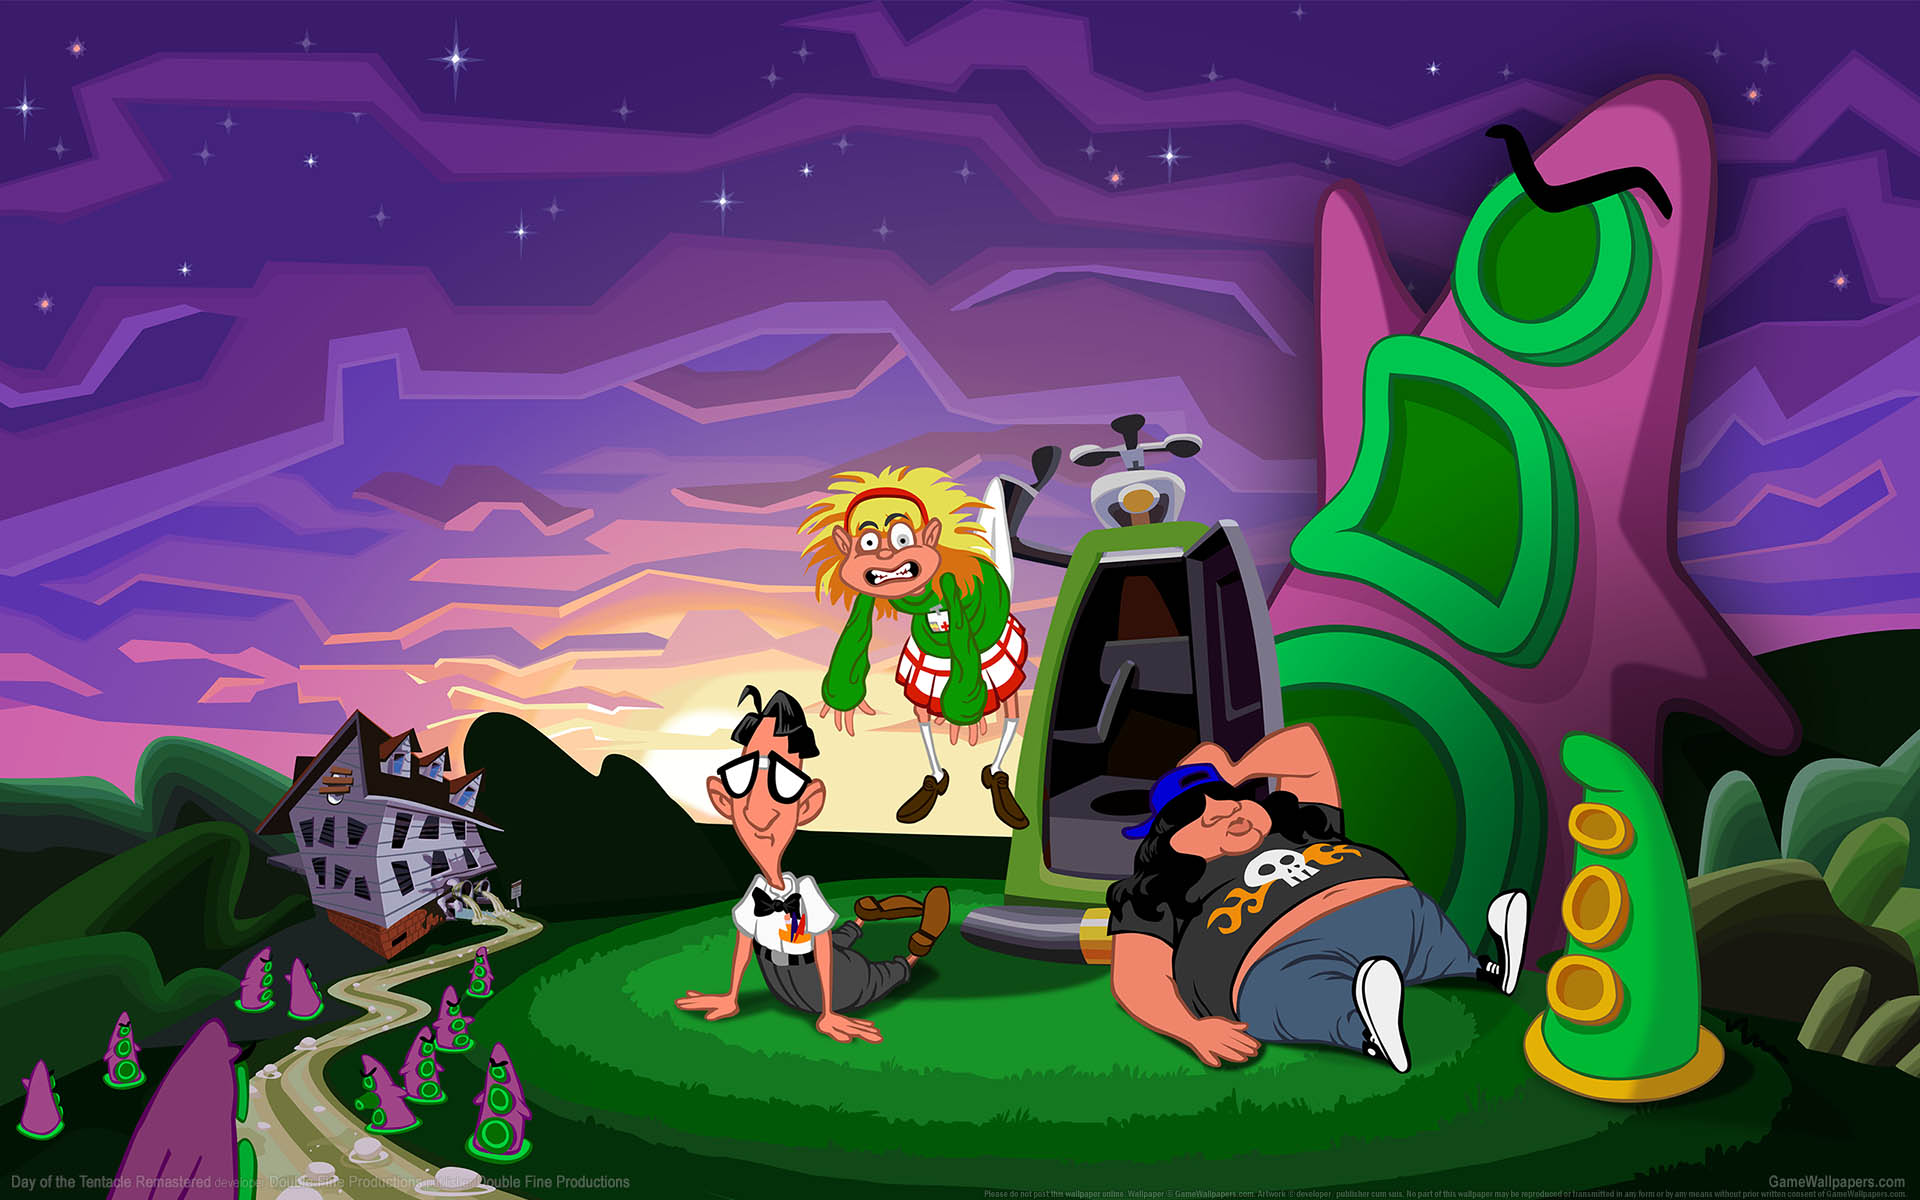 Day of the Tentacle Remastered fond d'cran 01 1920x1200